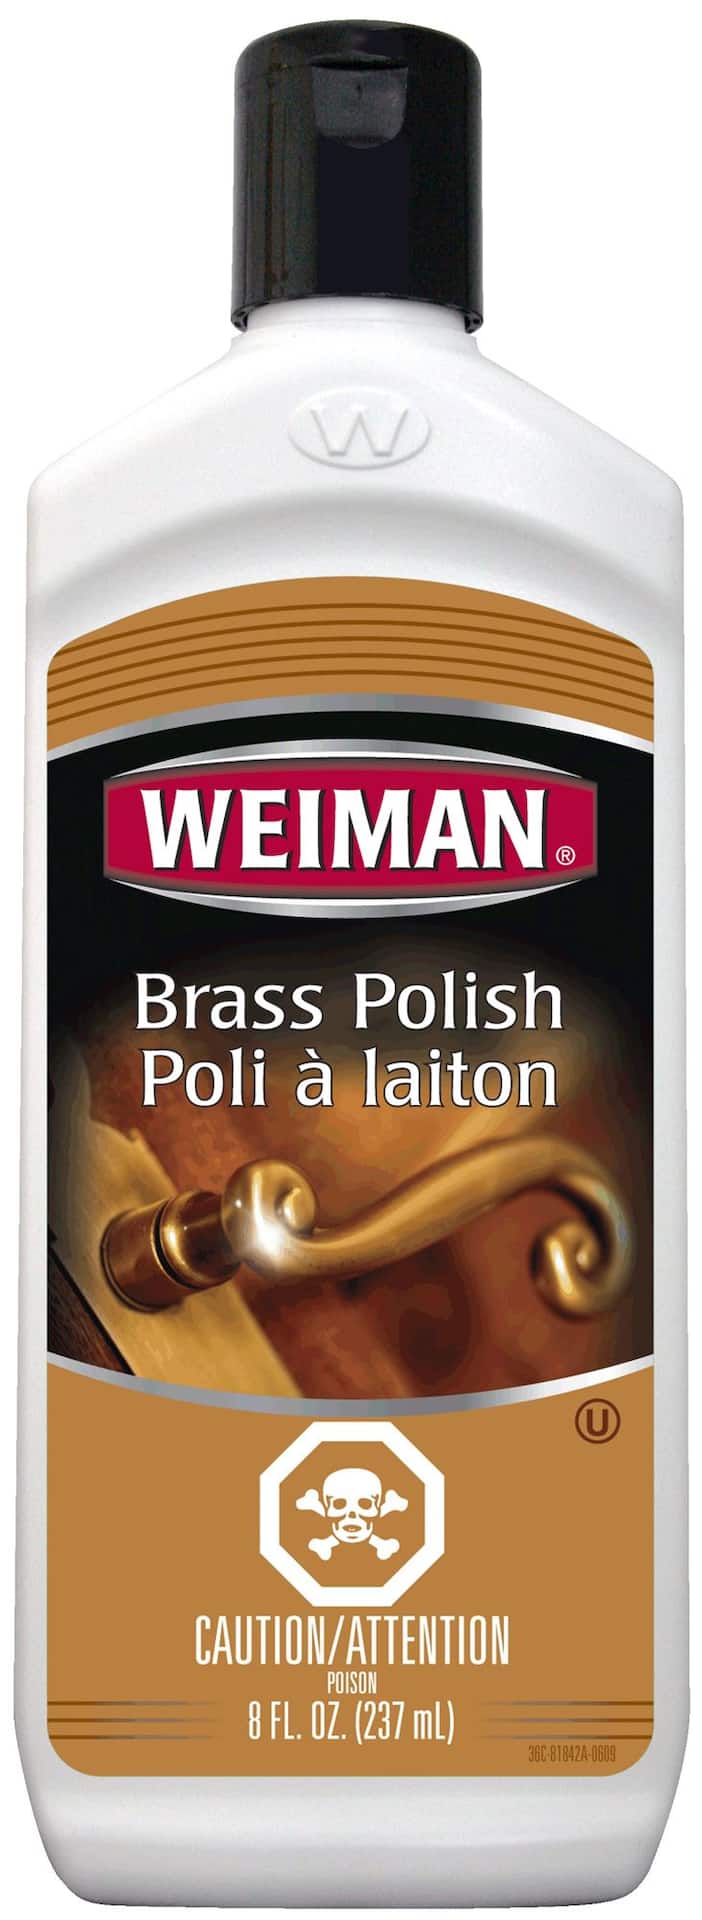 https://media-www.canadiantire.ca/product/living/cleaning/household-cleaning-solutions/0534212/weiman-brass-polish-2a360392-25e1-4a05-9d5c-f6a16ce4b494-jpgrendition.jpg